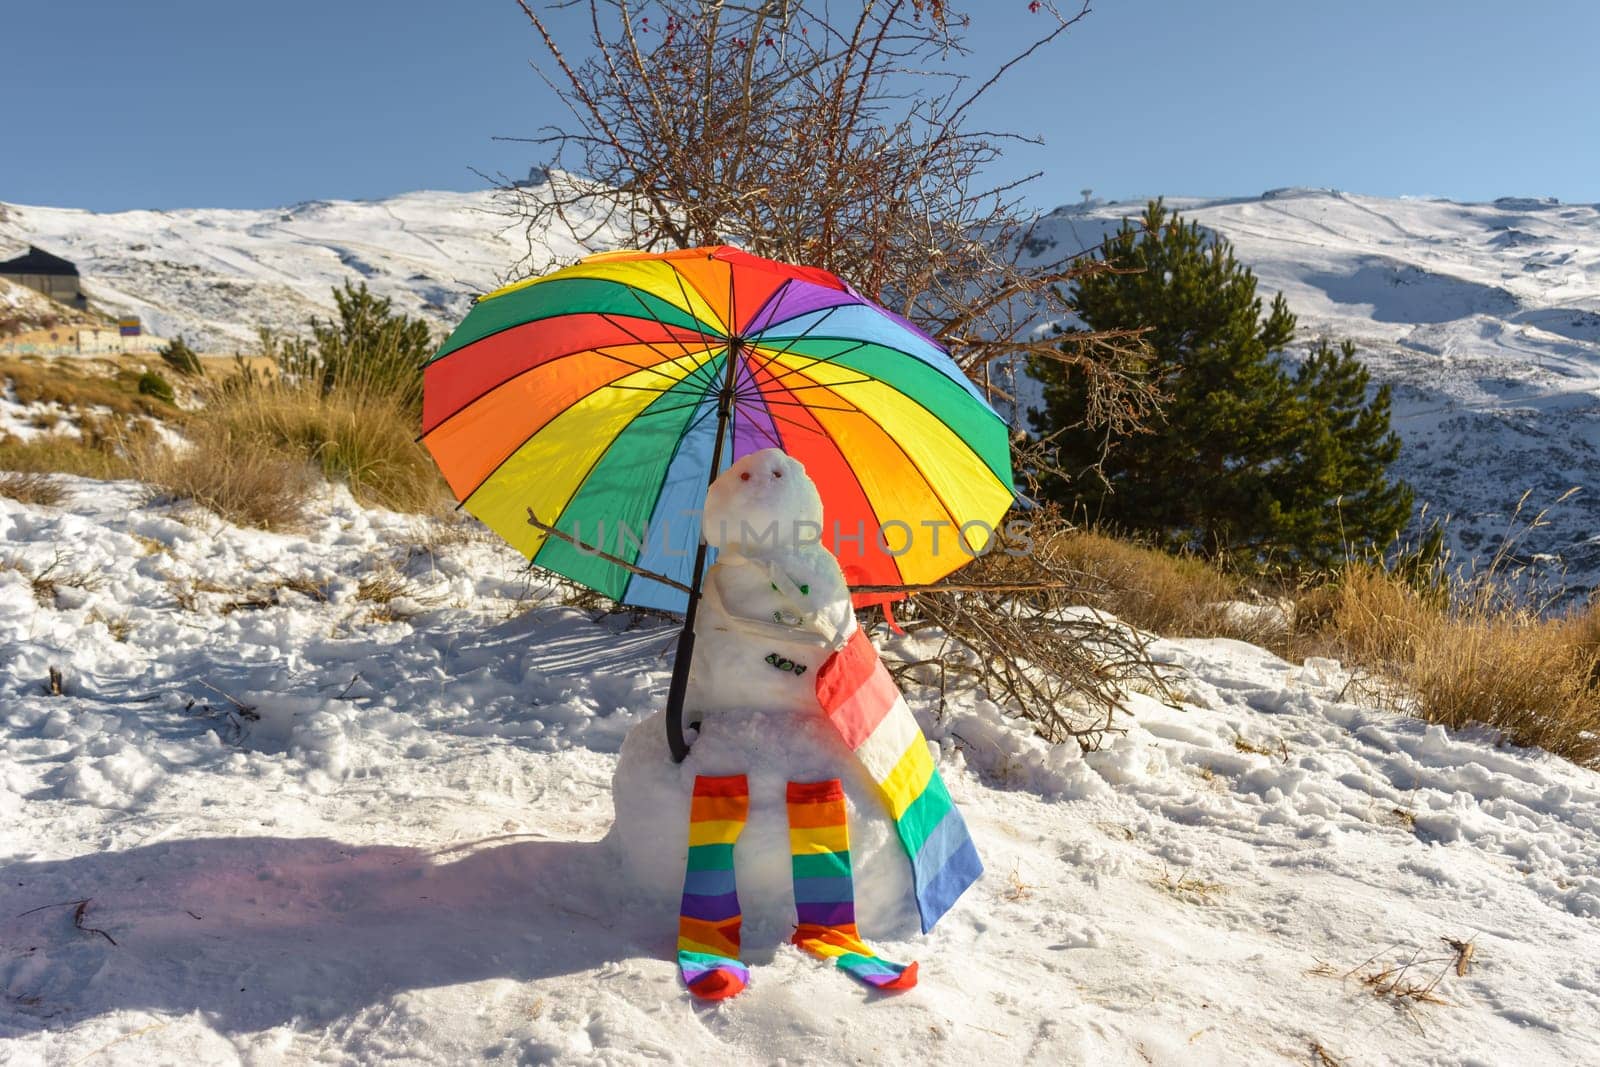 snowman, brightly colored in the mountains, lgtb community by carlosviv